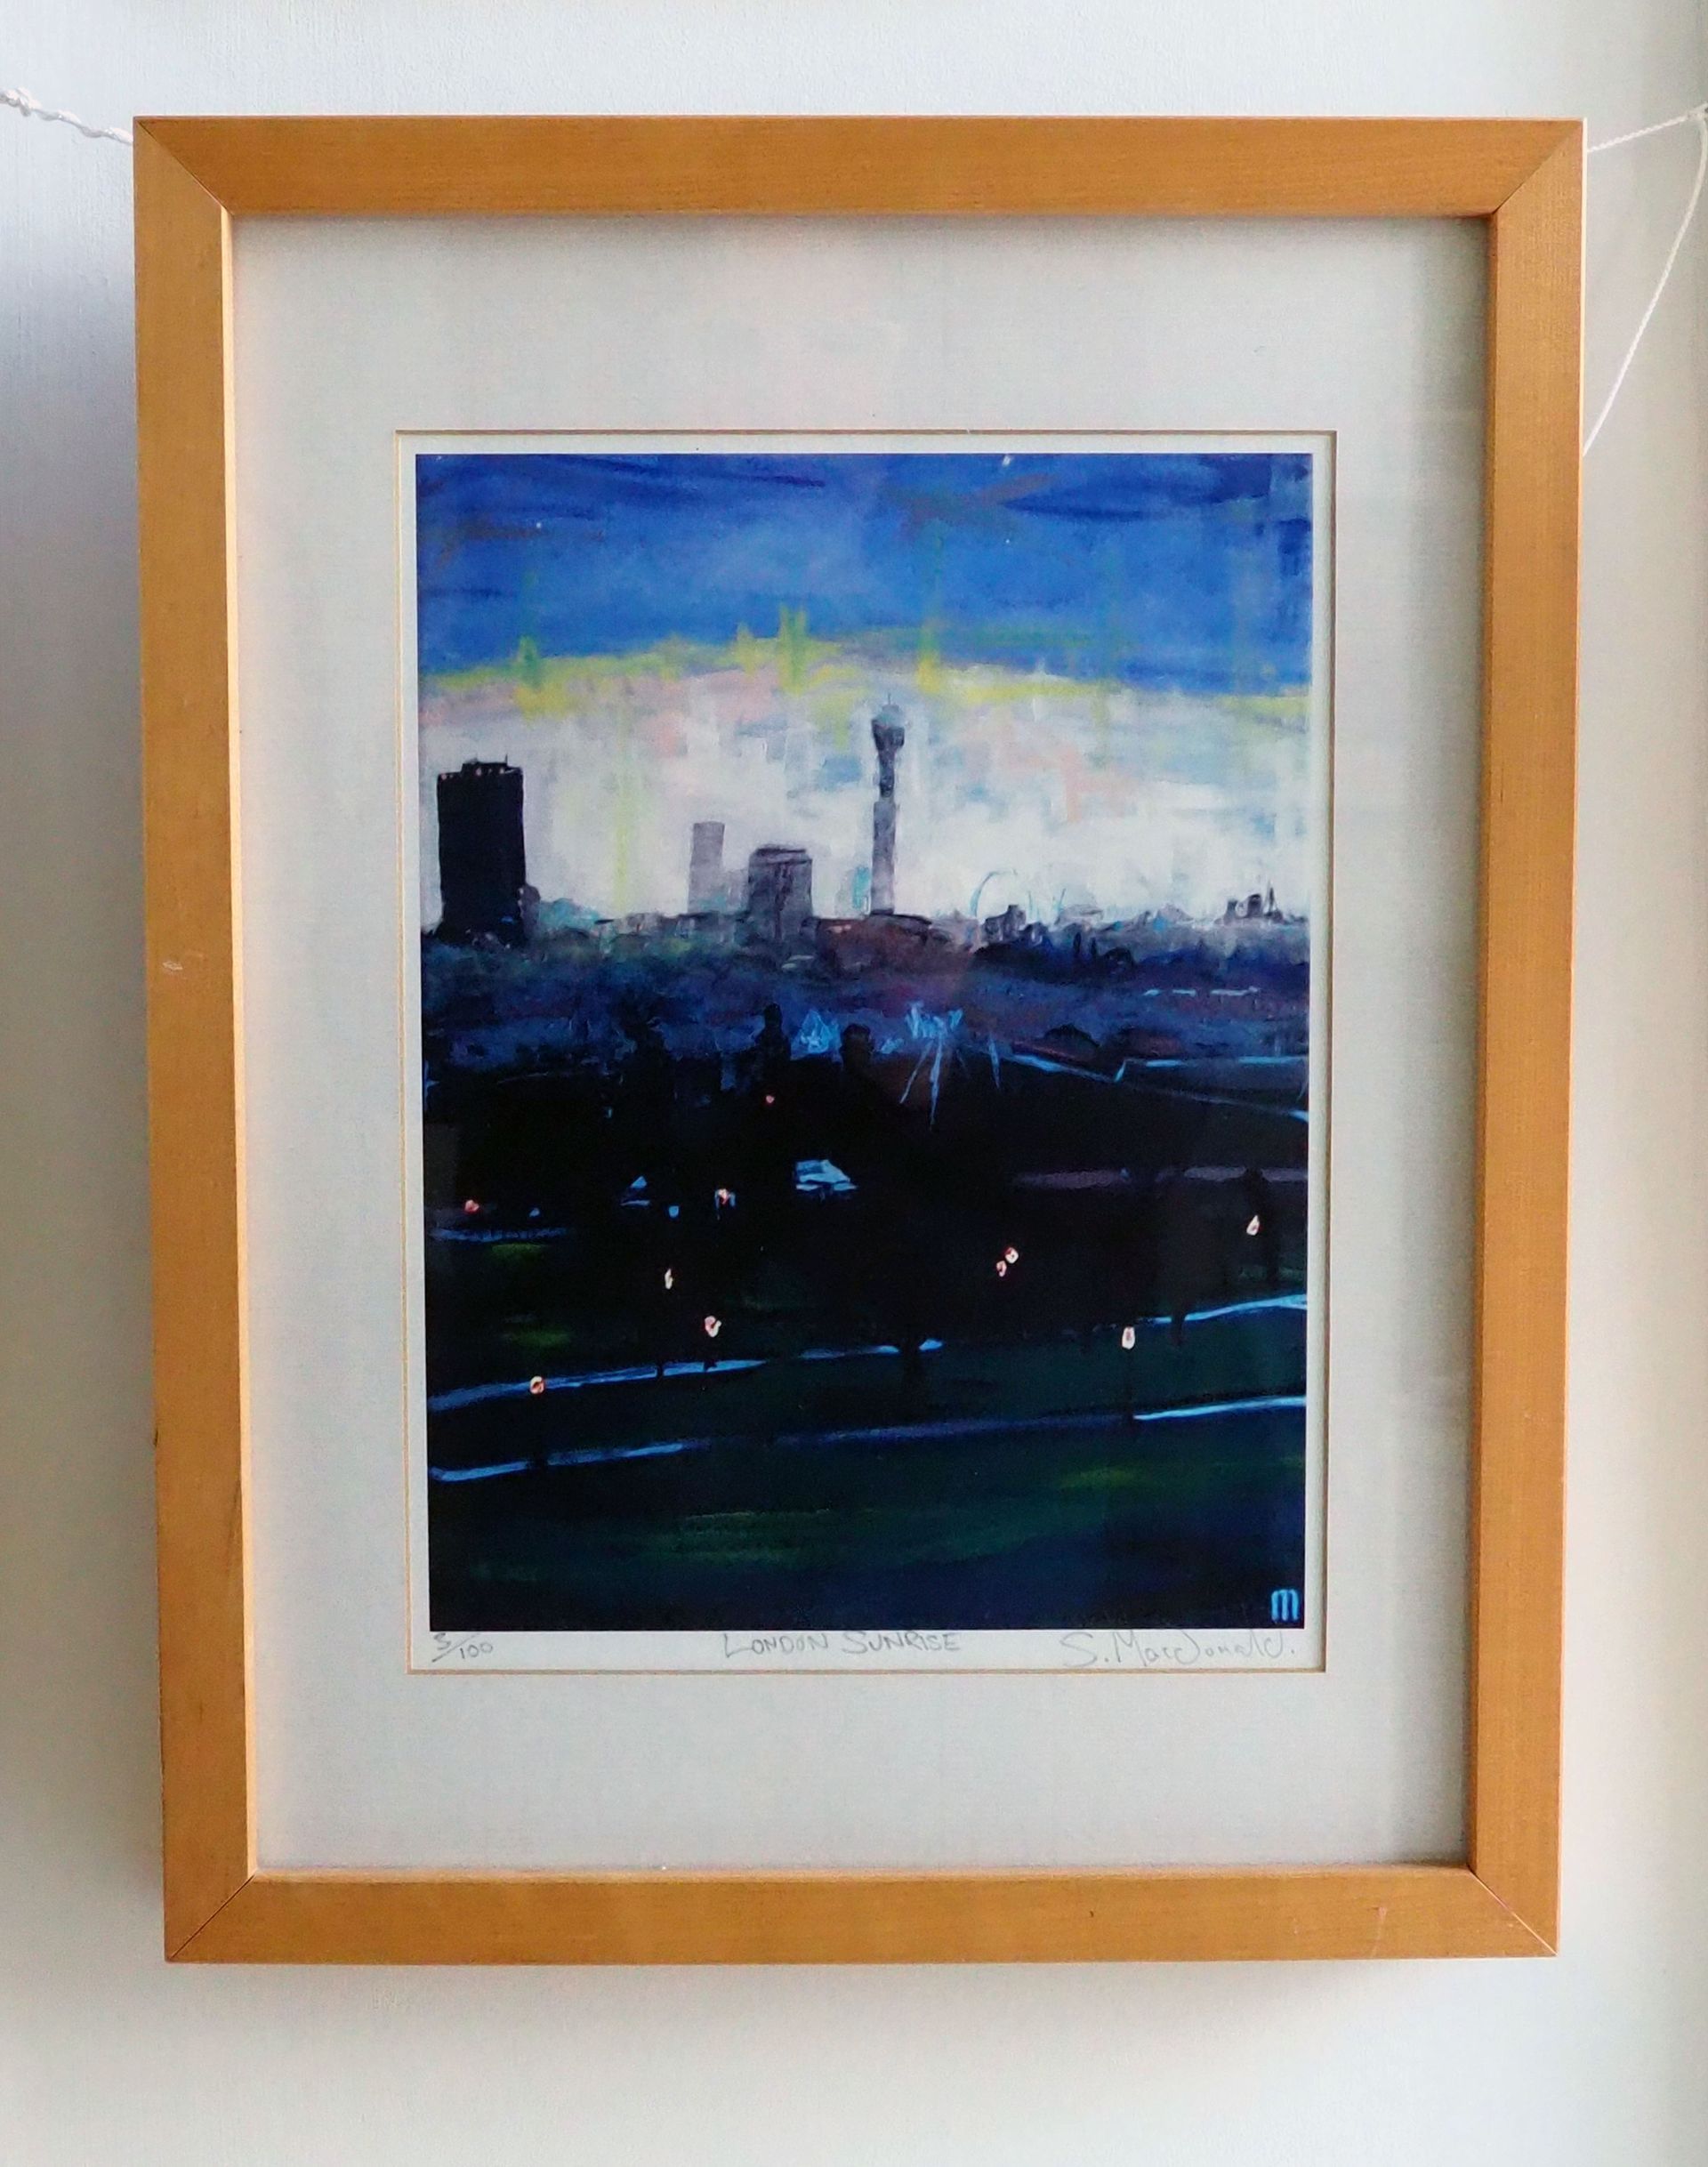 A framed print of painting London Sunrise. A back lit portrait of a city scape with park space in the foreground. The park is still in the dark with its lamp post lights shining orange yellow like fire flies. There are tall grey / lavender purple buildings on the horizon. A white sky surrounds the buildings topped with a yellow layer and then a thick blue and dark blue end of night sky. 